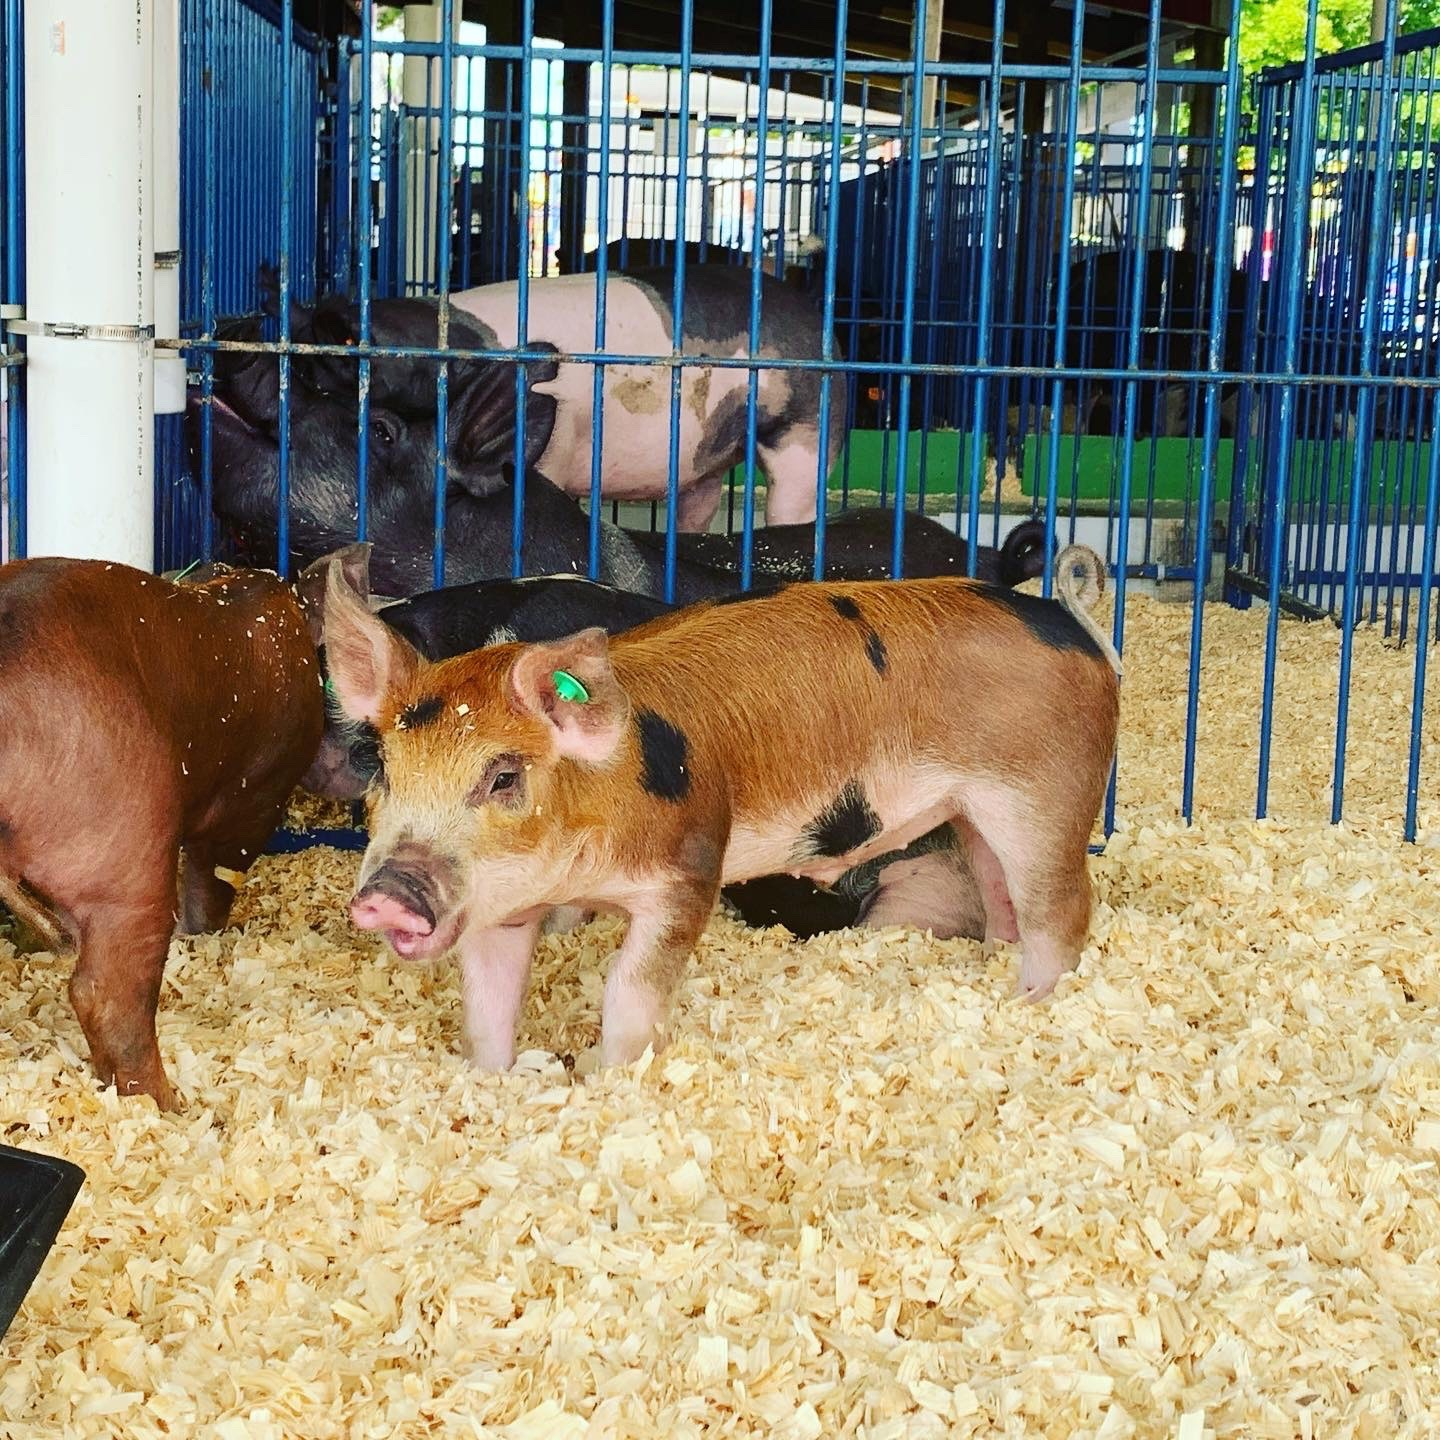 Therapy Pigs: Good or Bad?